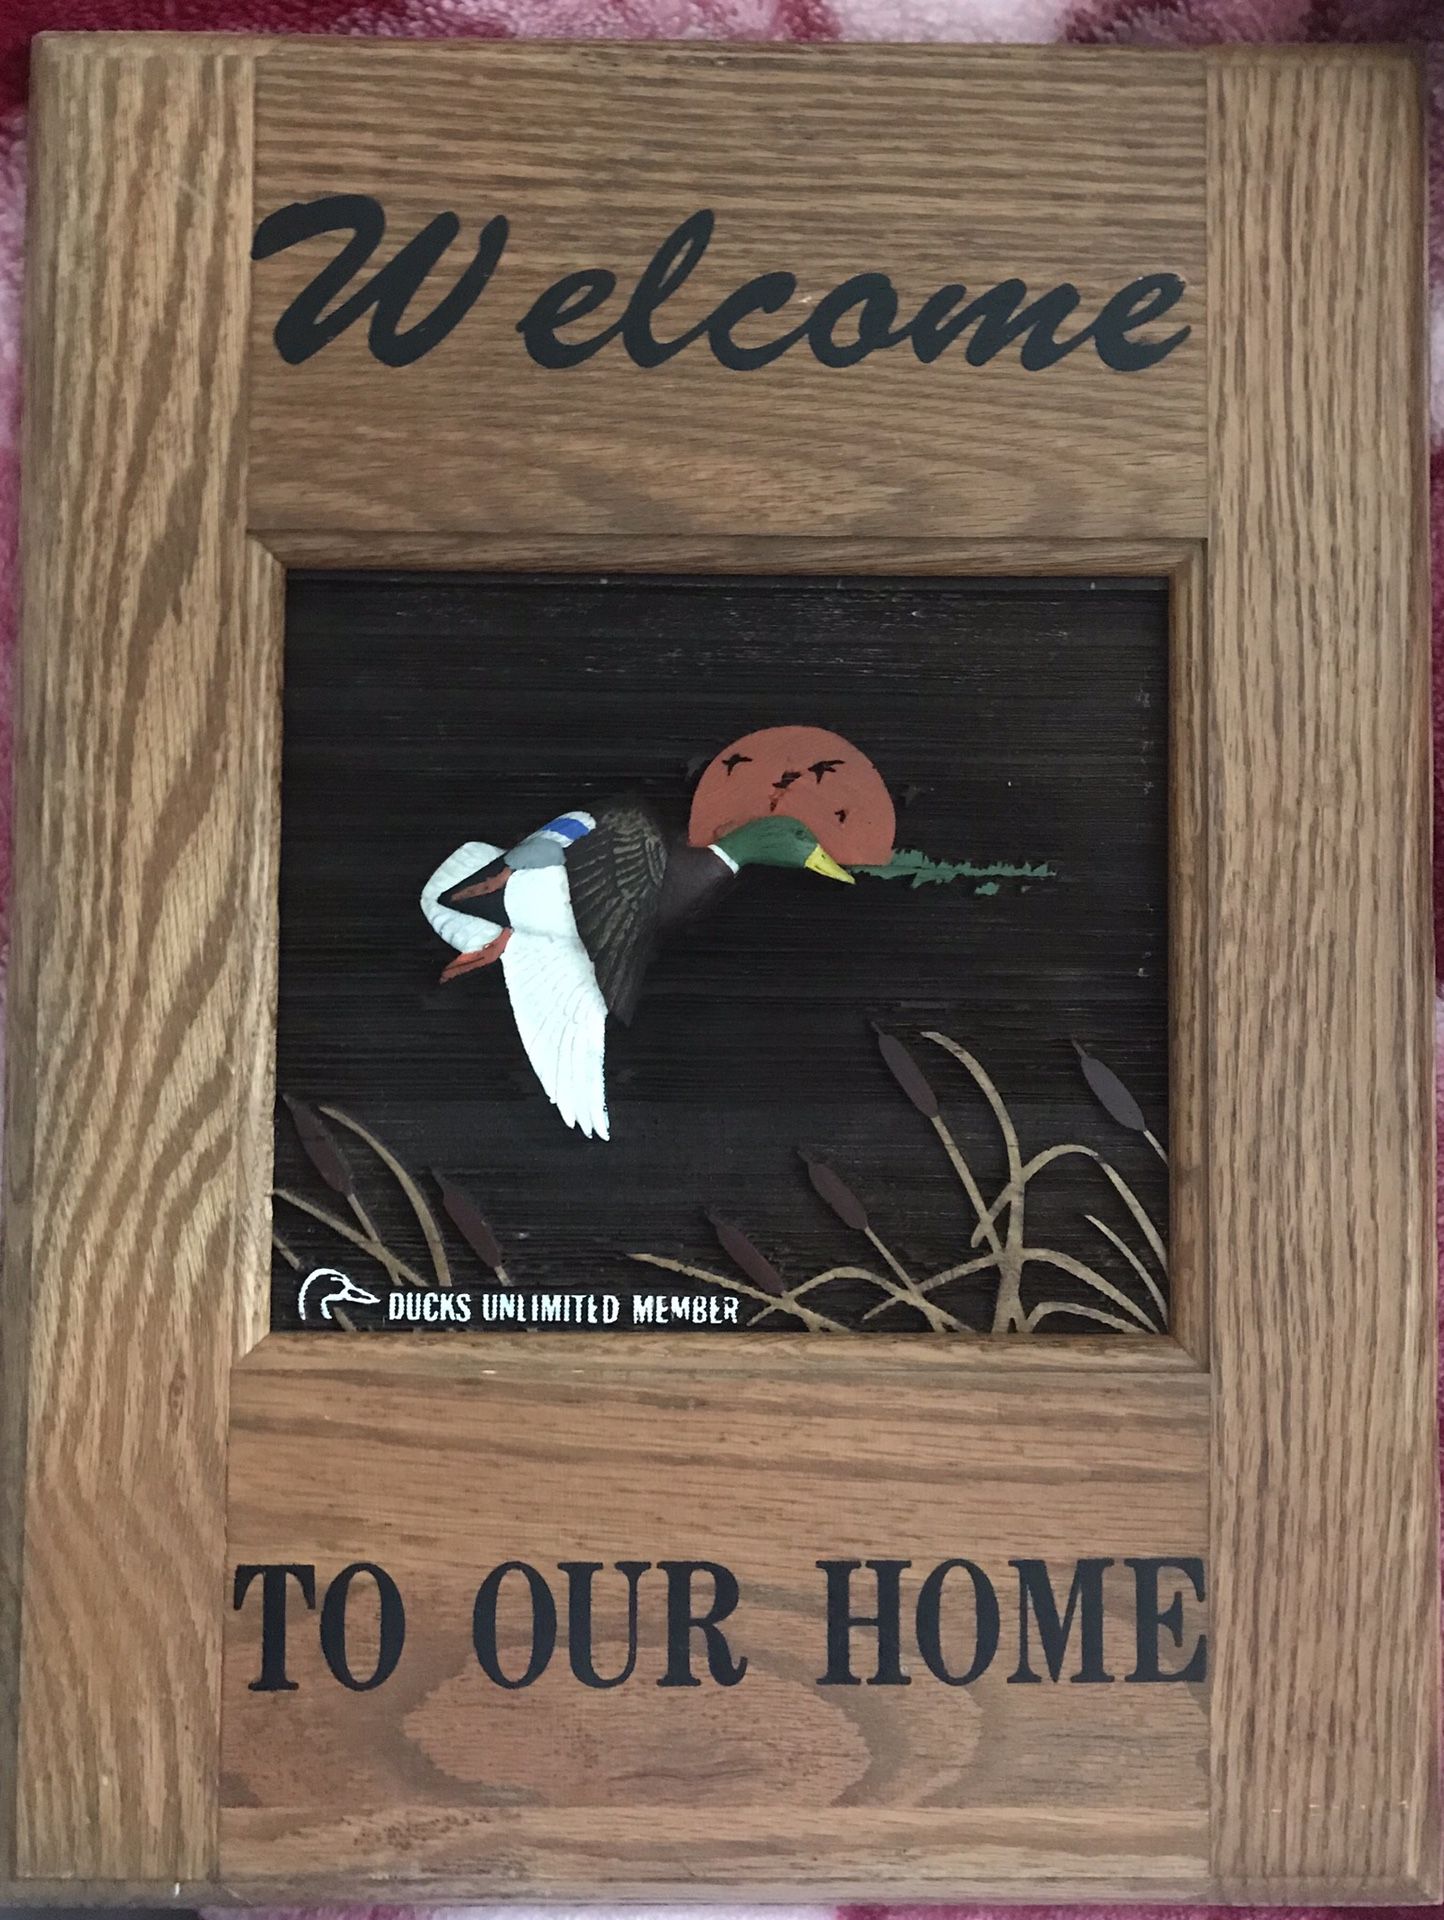 Culbertson’s LTD Wooden Ducks Unlimited Welcome Sign